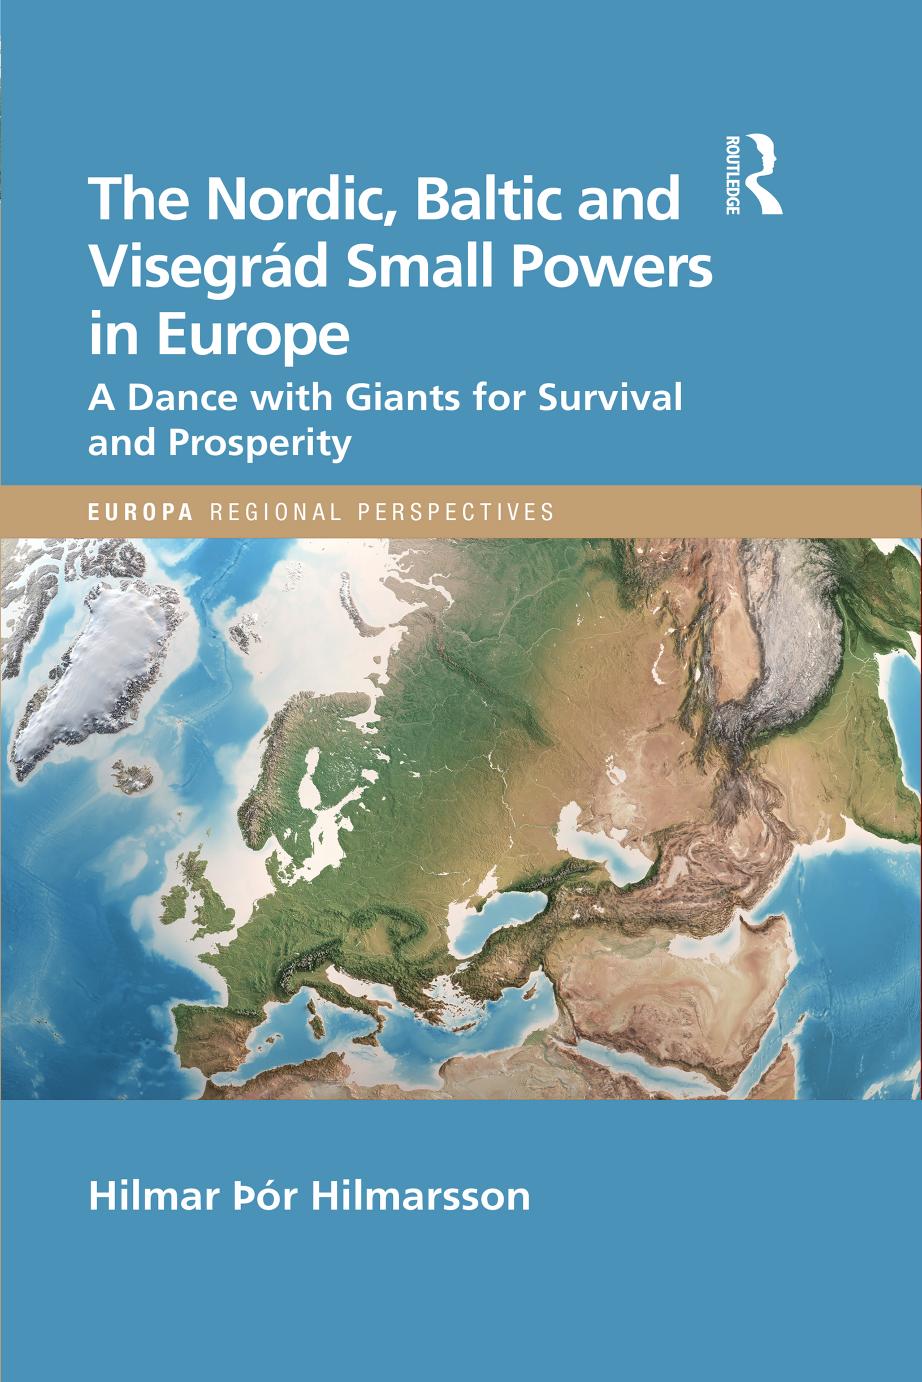 The Nordic, Baltic and VisegrÃ¡d Small Powers in Europe: A Dance With Giants for Survival and Prosperity by Hilmar Hilmarsson